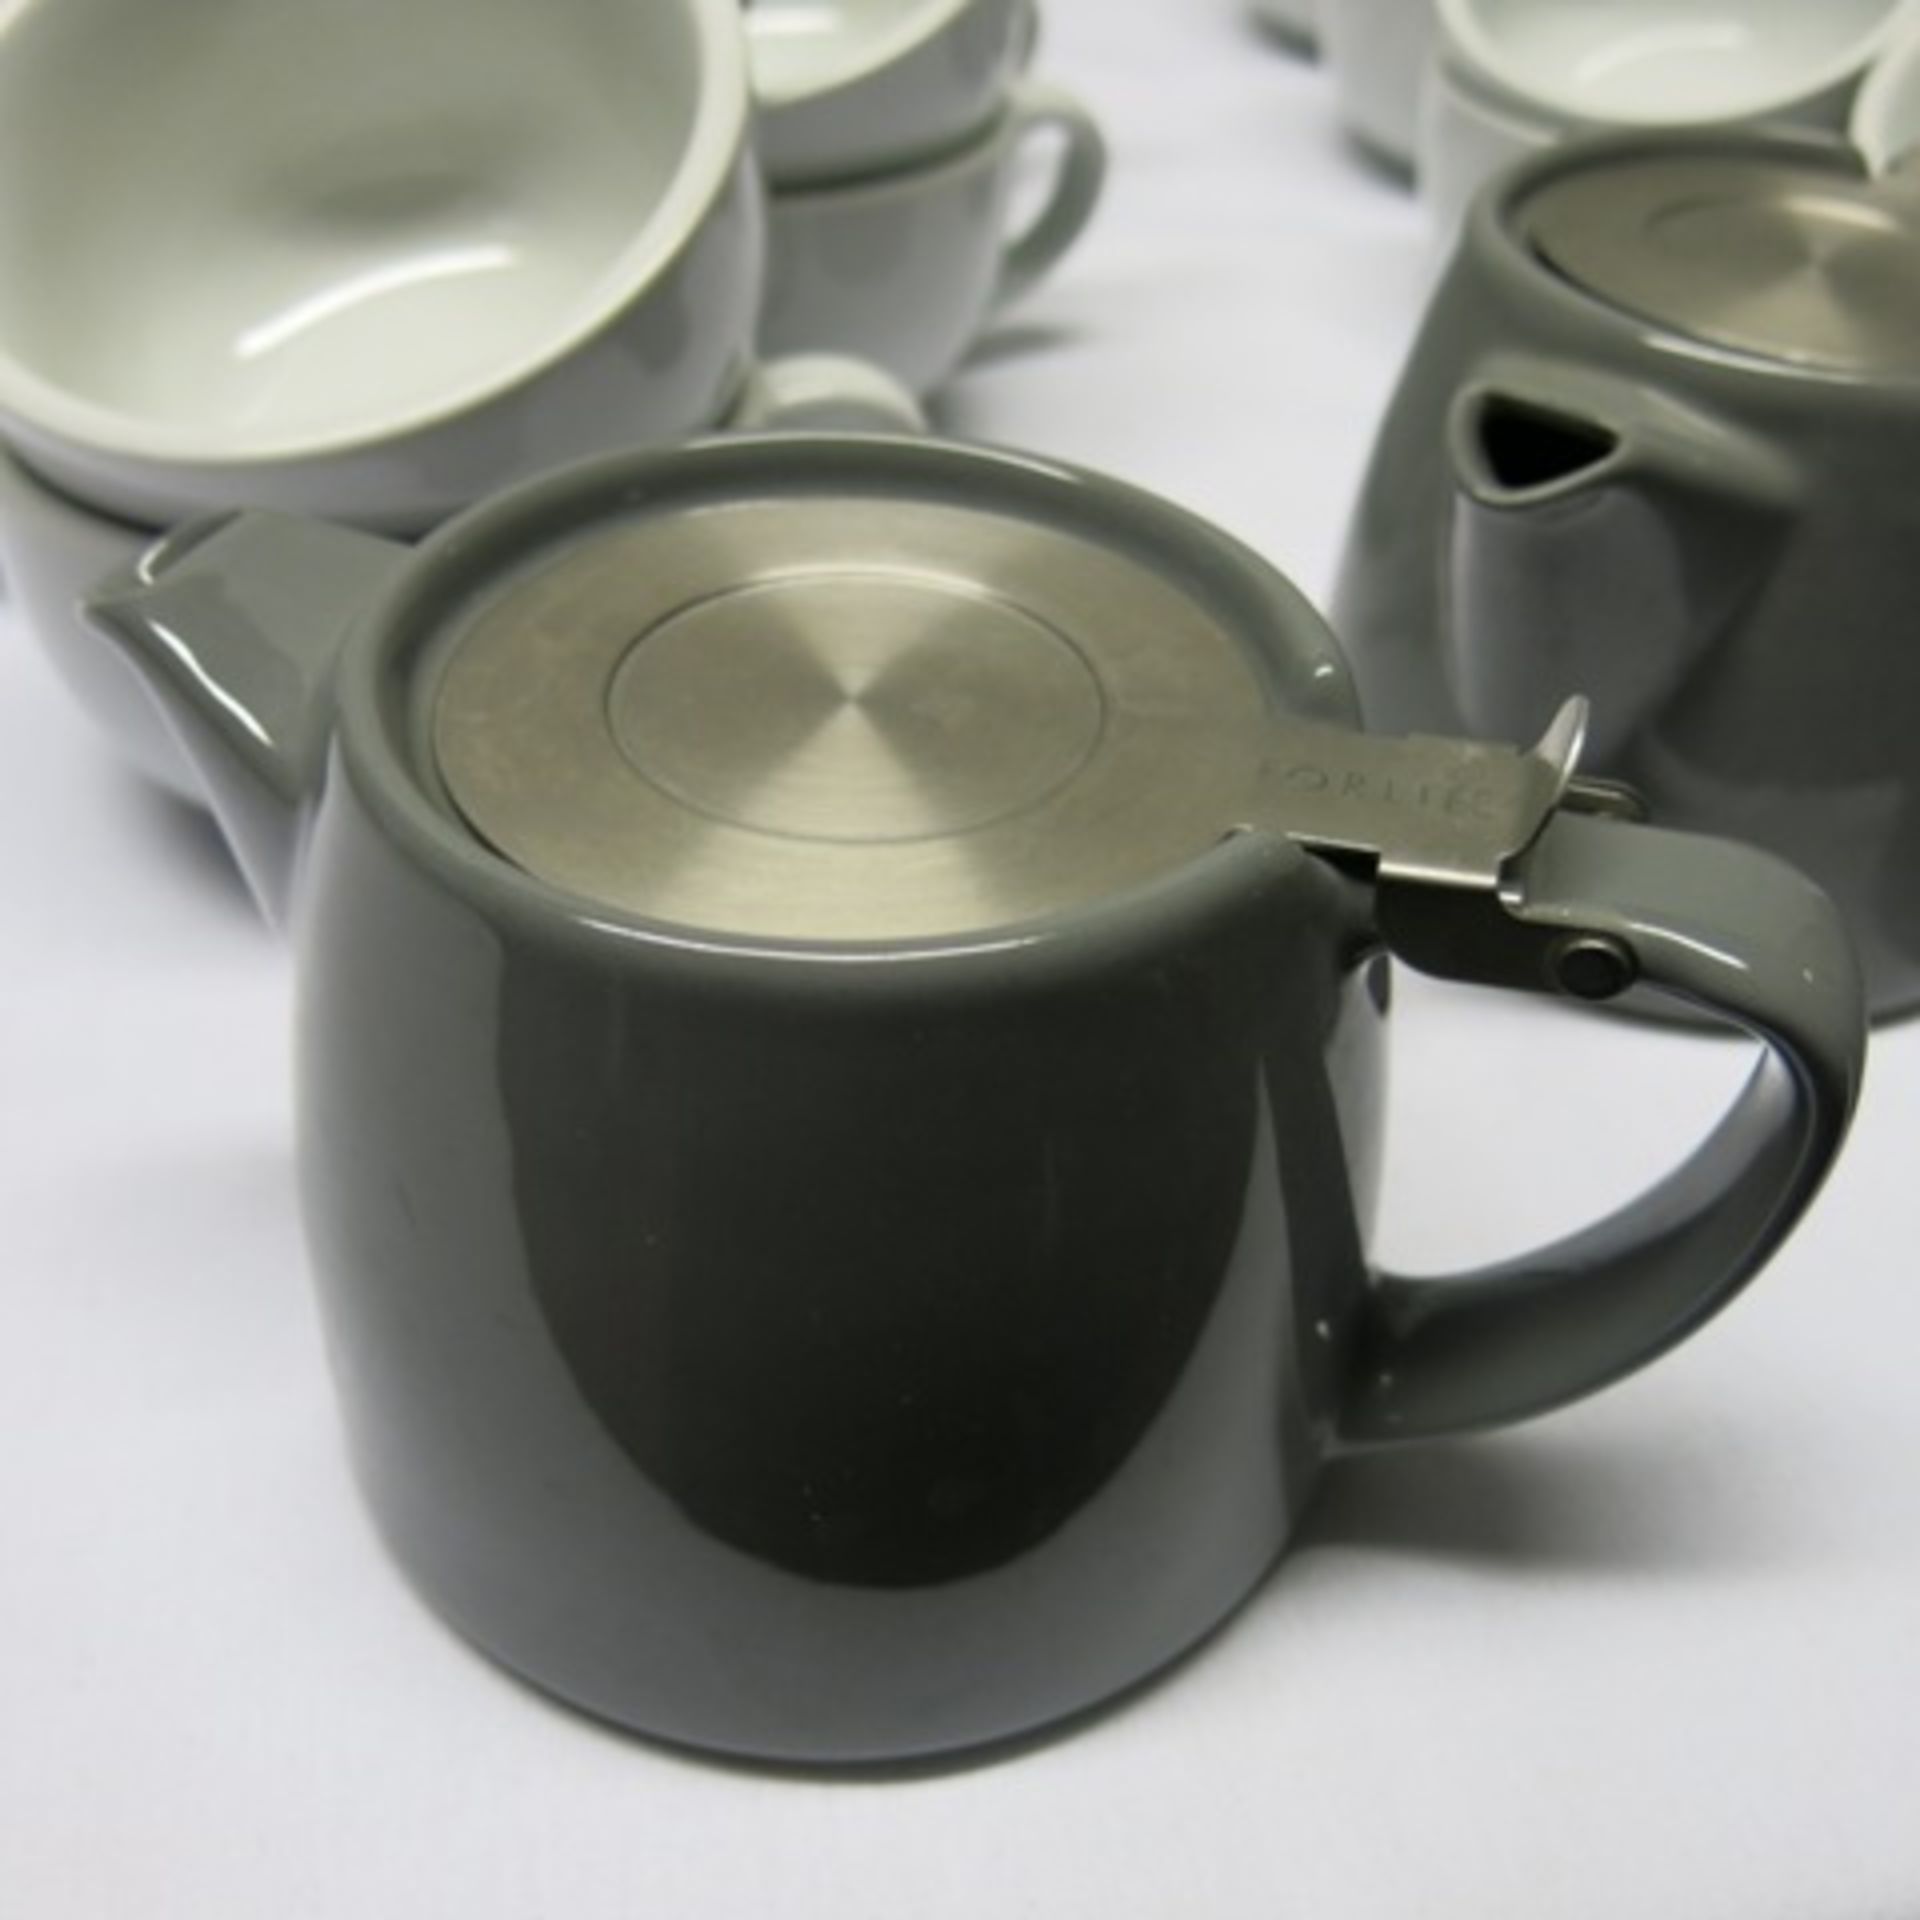 Large Quantity of Tea & Coffee Cup & Saucers with Teapots to Include: 7 x Forlife Teapots, 14 x - Image 8 of 10